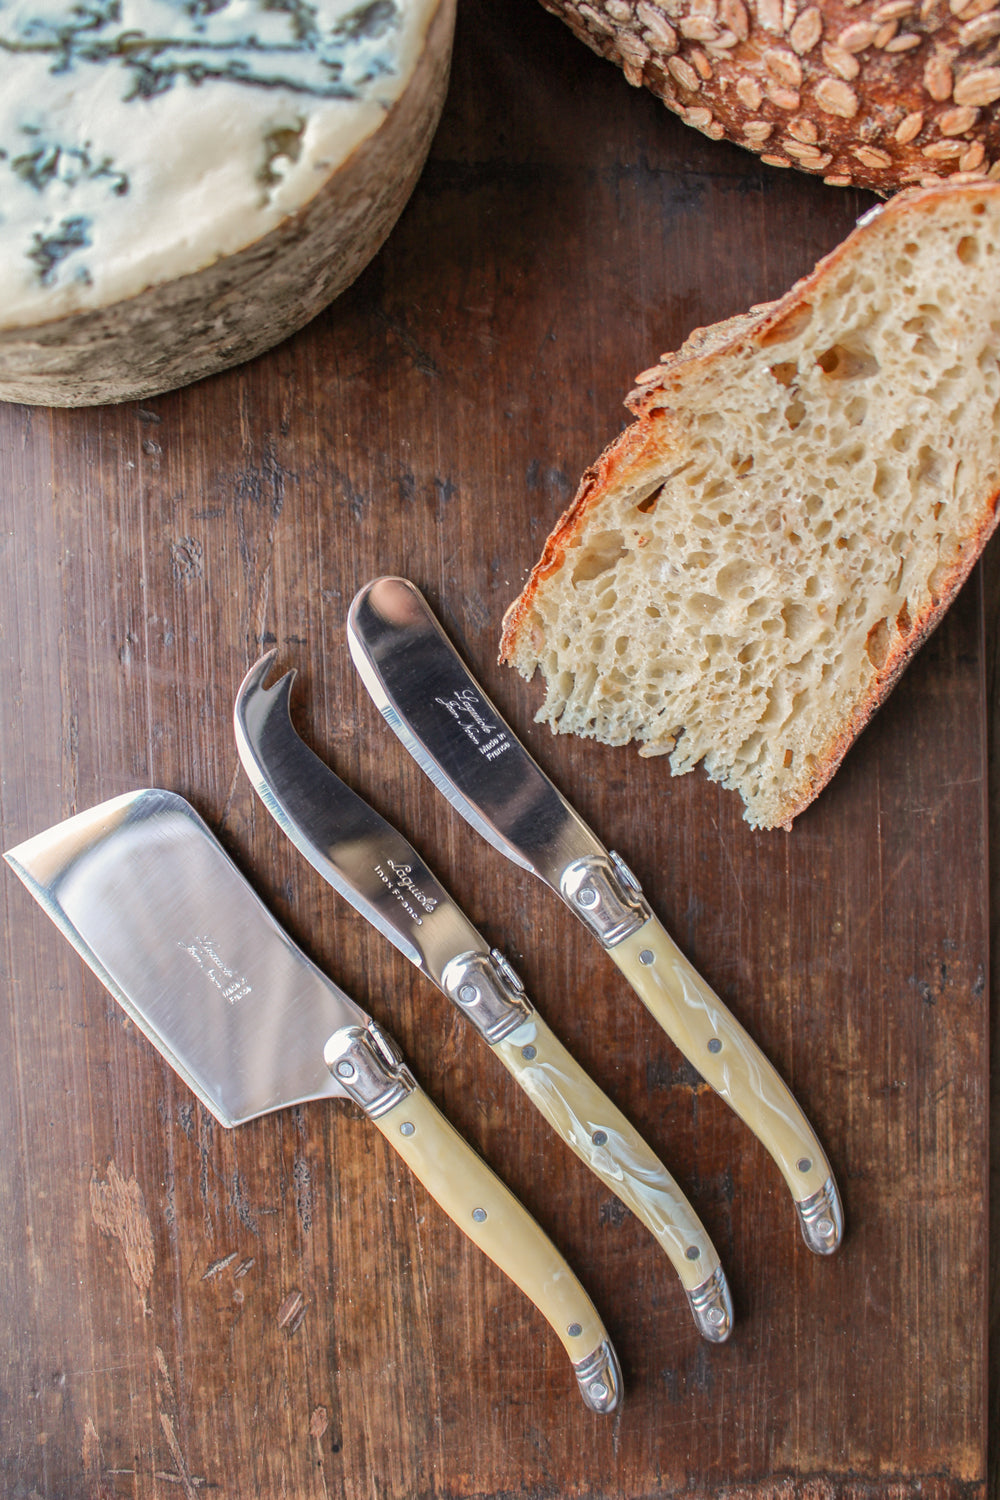 Laguiole Pale Horn Mini Cheese Set in Brown Box (Cutter, Spreader, Fork Tipped Knife) Cutlery Set Laguiole Brand_Laguiole Flatware Sets Gift Sets Kitchen_Dinnerware Kitchen_Kitchenware Laguiole Mini Cheese Sets Pale_Horn_Mini_Cheese_IMG_0635_edit